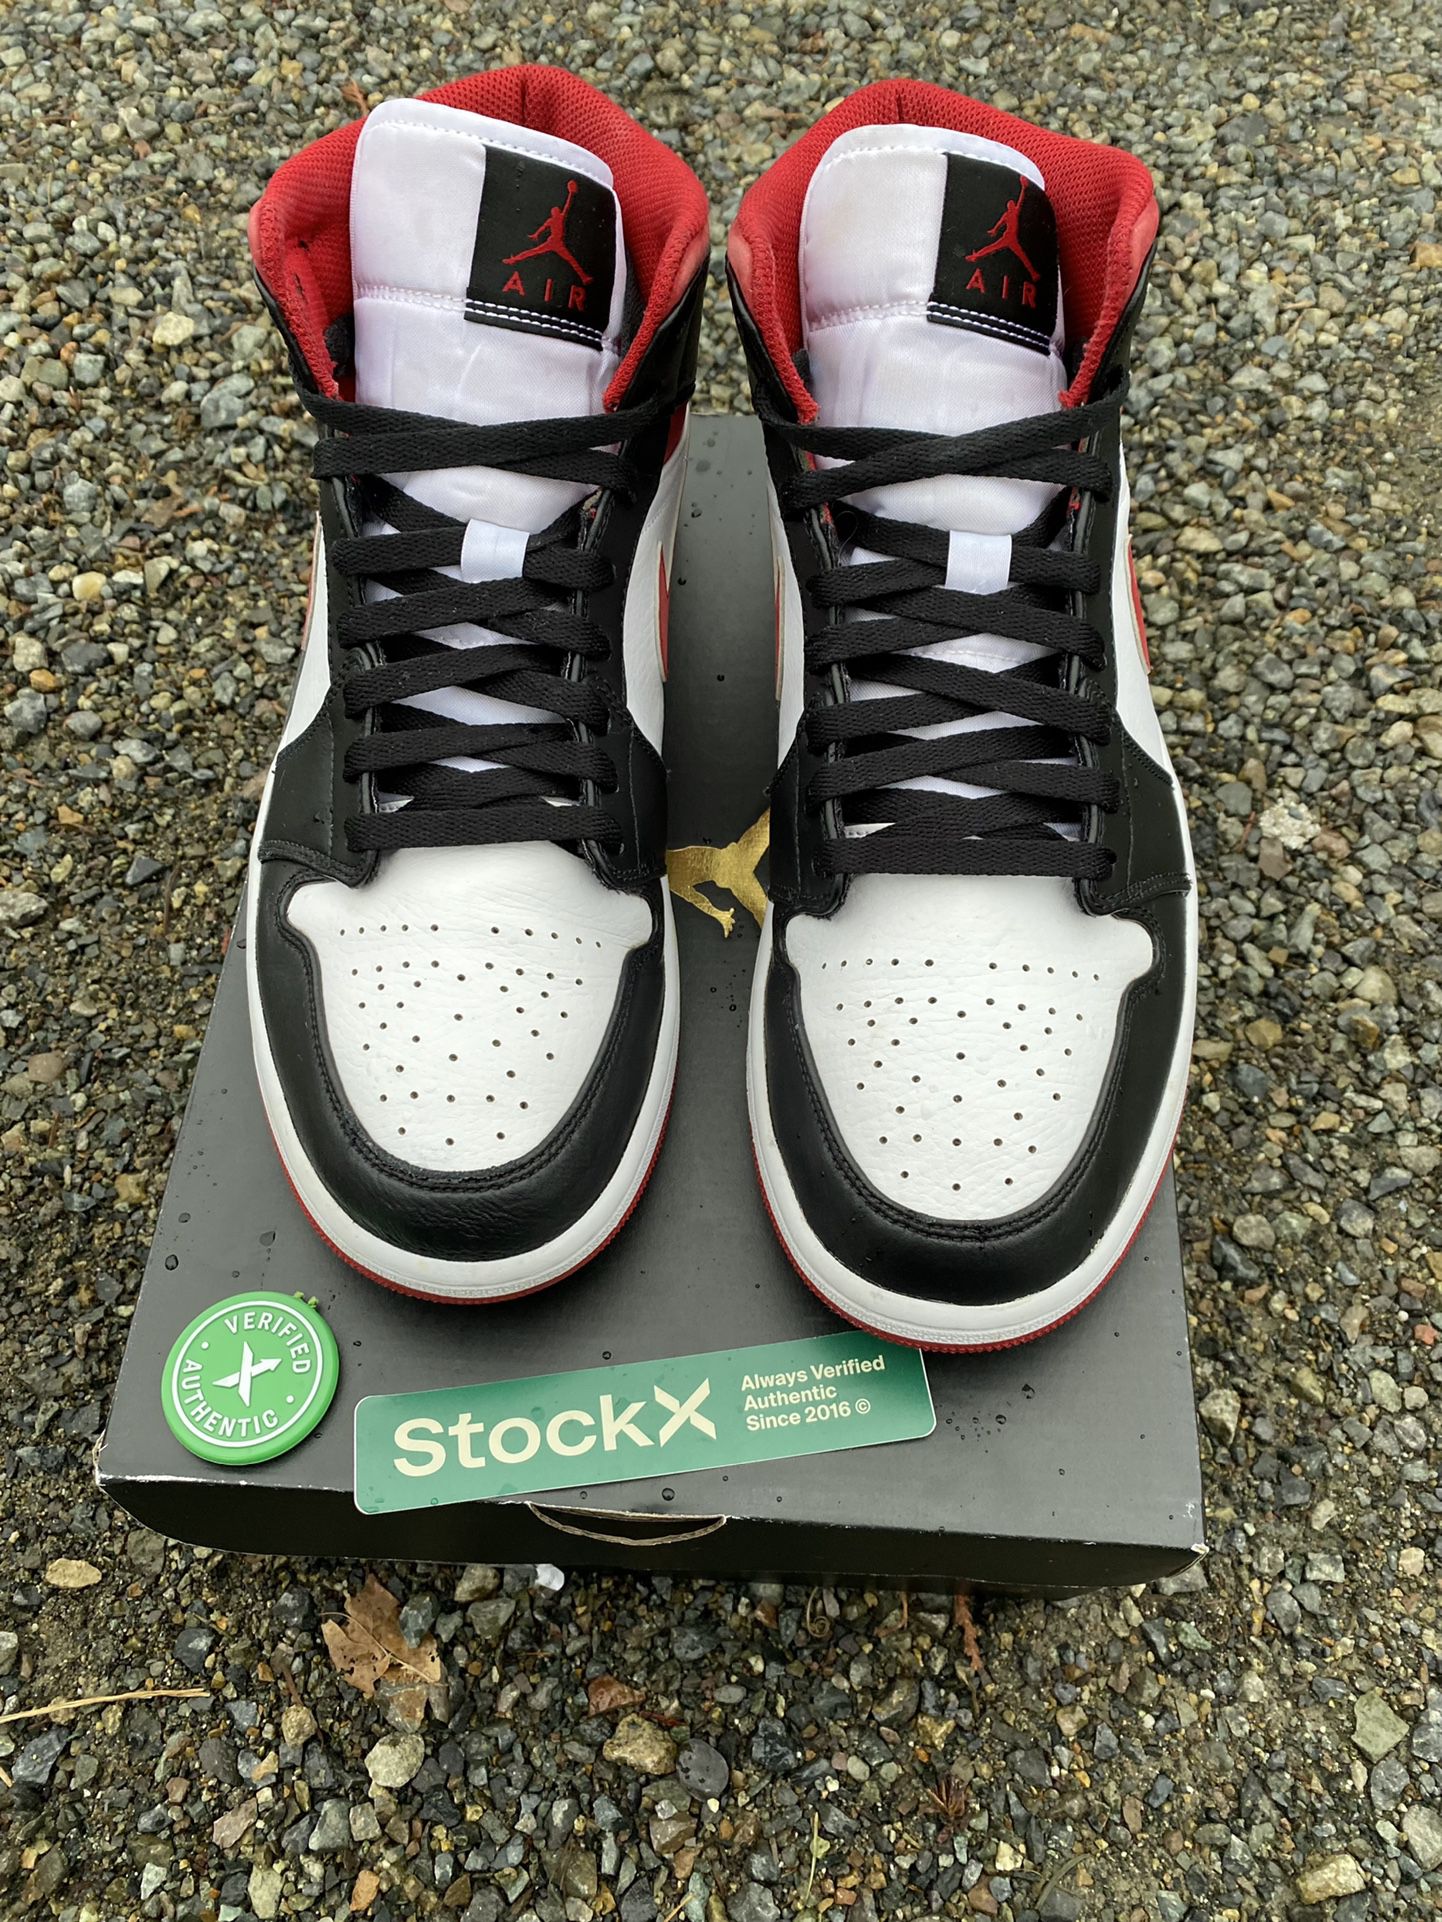 Jordan 1 High OG Strap Olympic Size 10 for Sale in Tacoma, WA - OfferUp